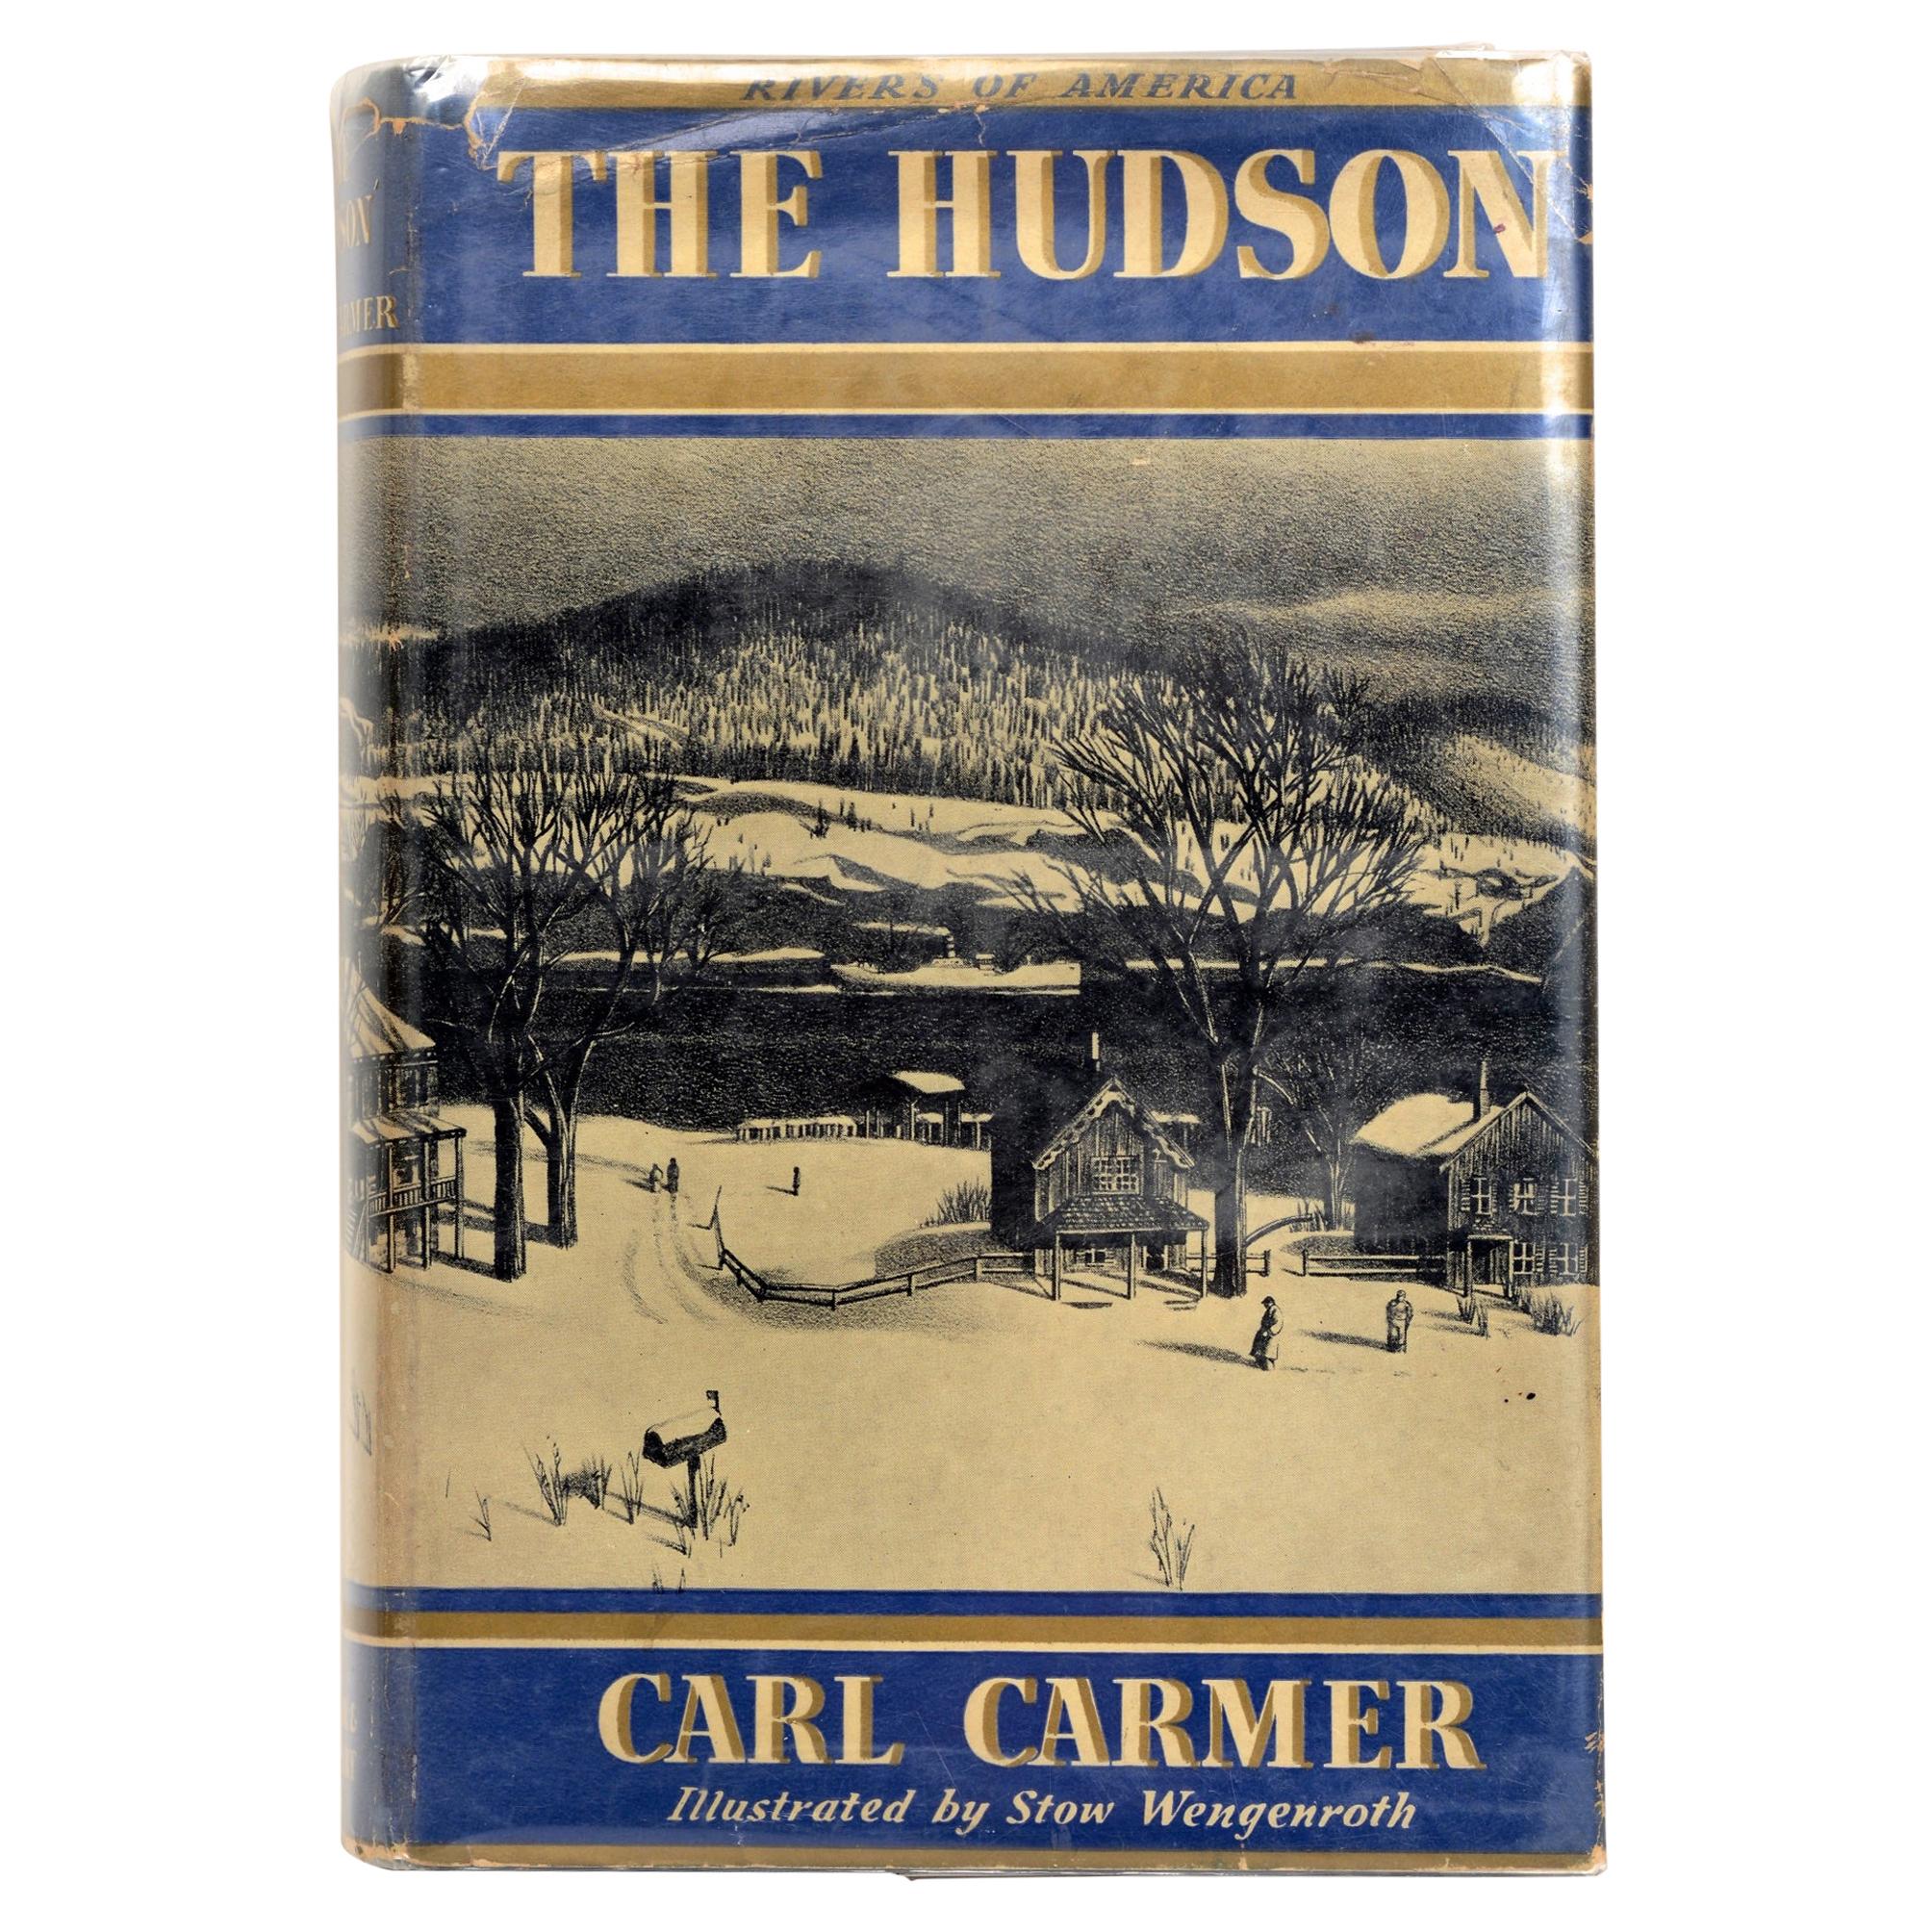 The Hudson by Carl Carmer, First Edition